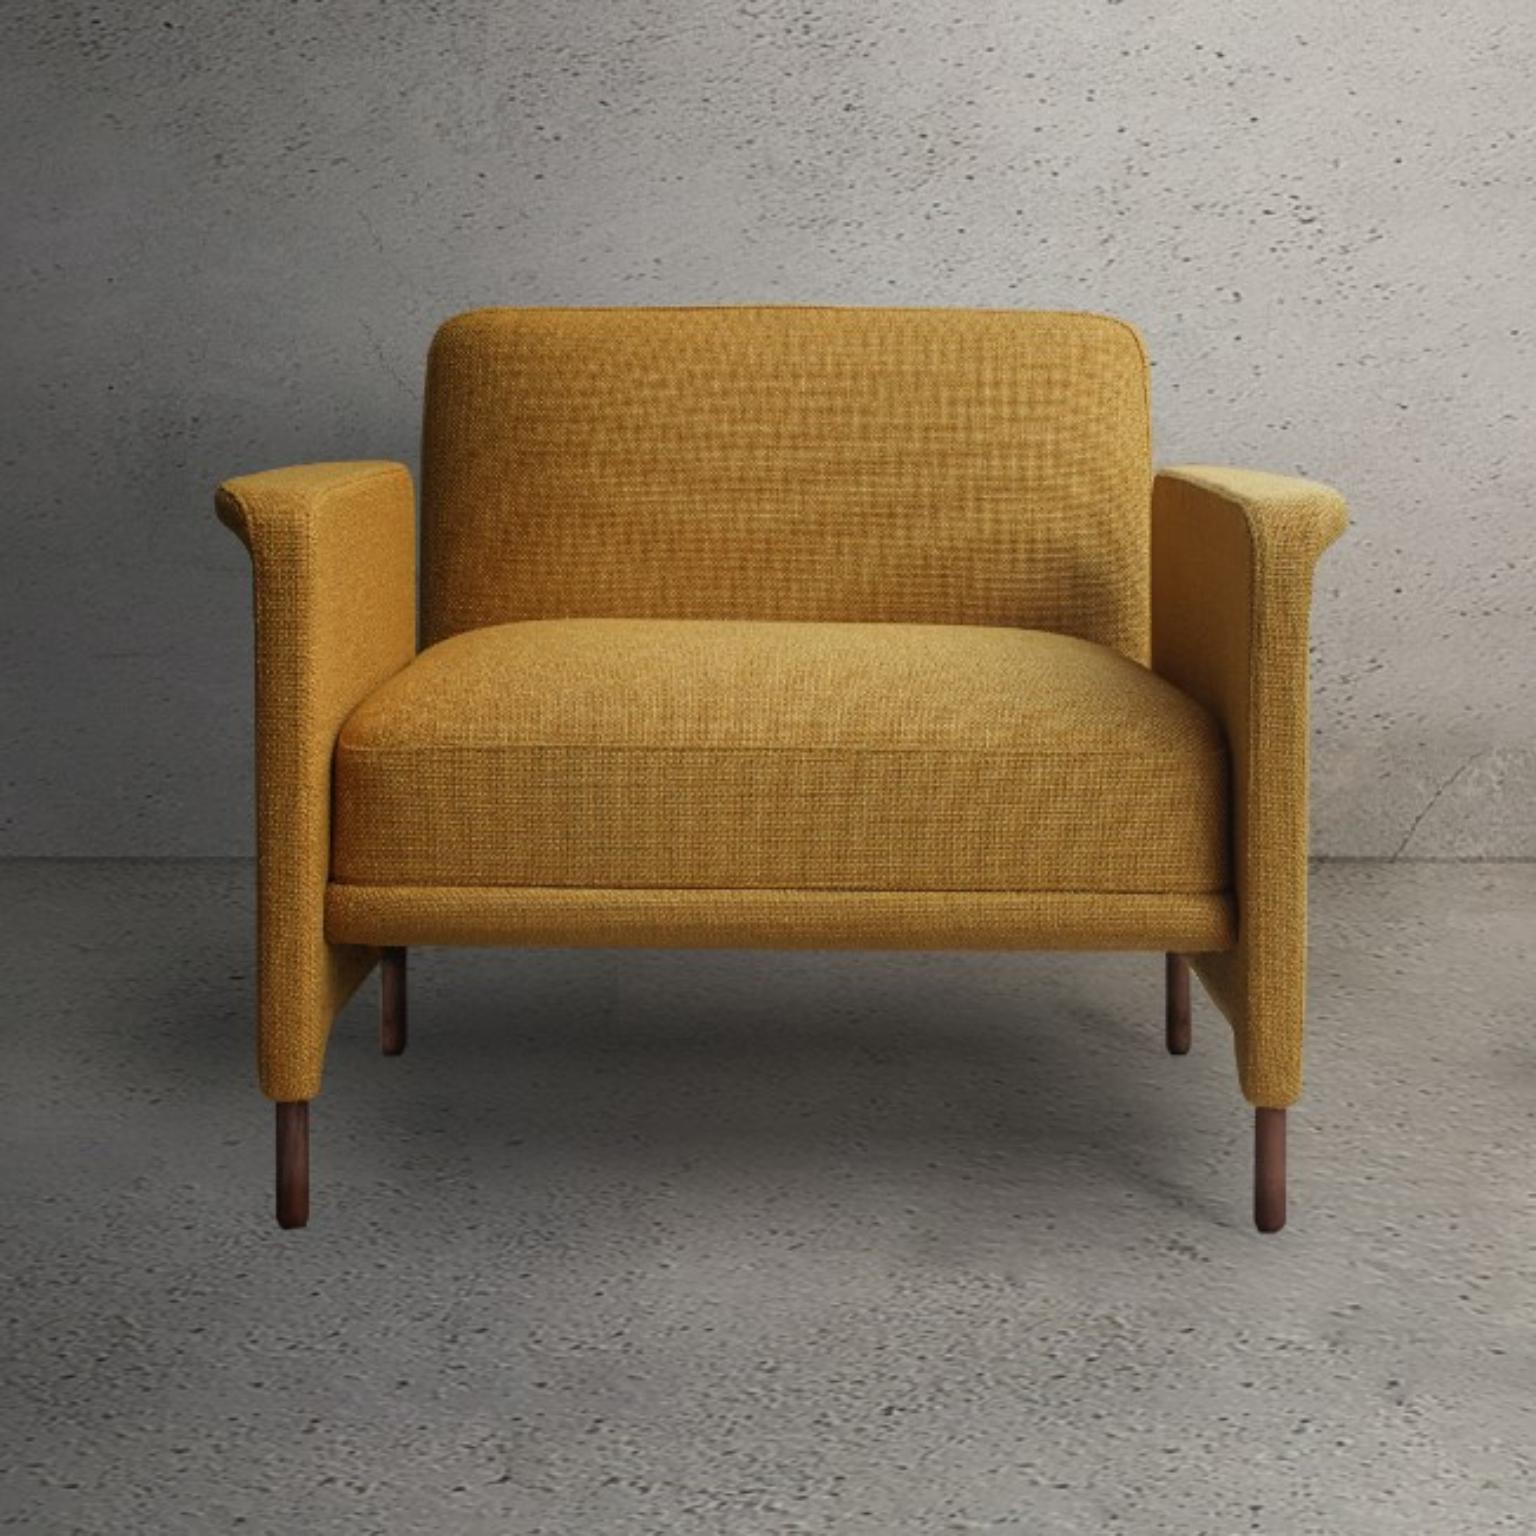 Carson armchair by Collector
Dimensions: W 86 x D 76 x H 70 cm
Materials: fabric, walnut
Other materials available.

The Collector brand aims to be part of the daily life by fusing furniture to our home routine and lifestyle, that’s why we’ve